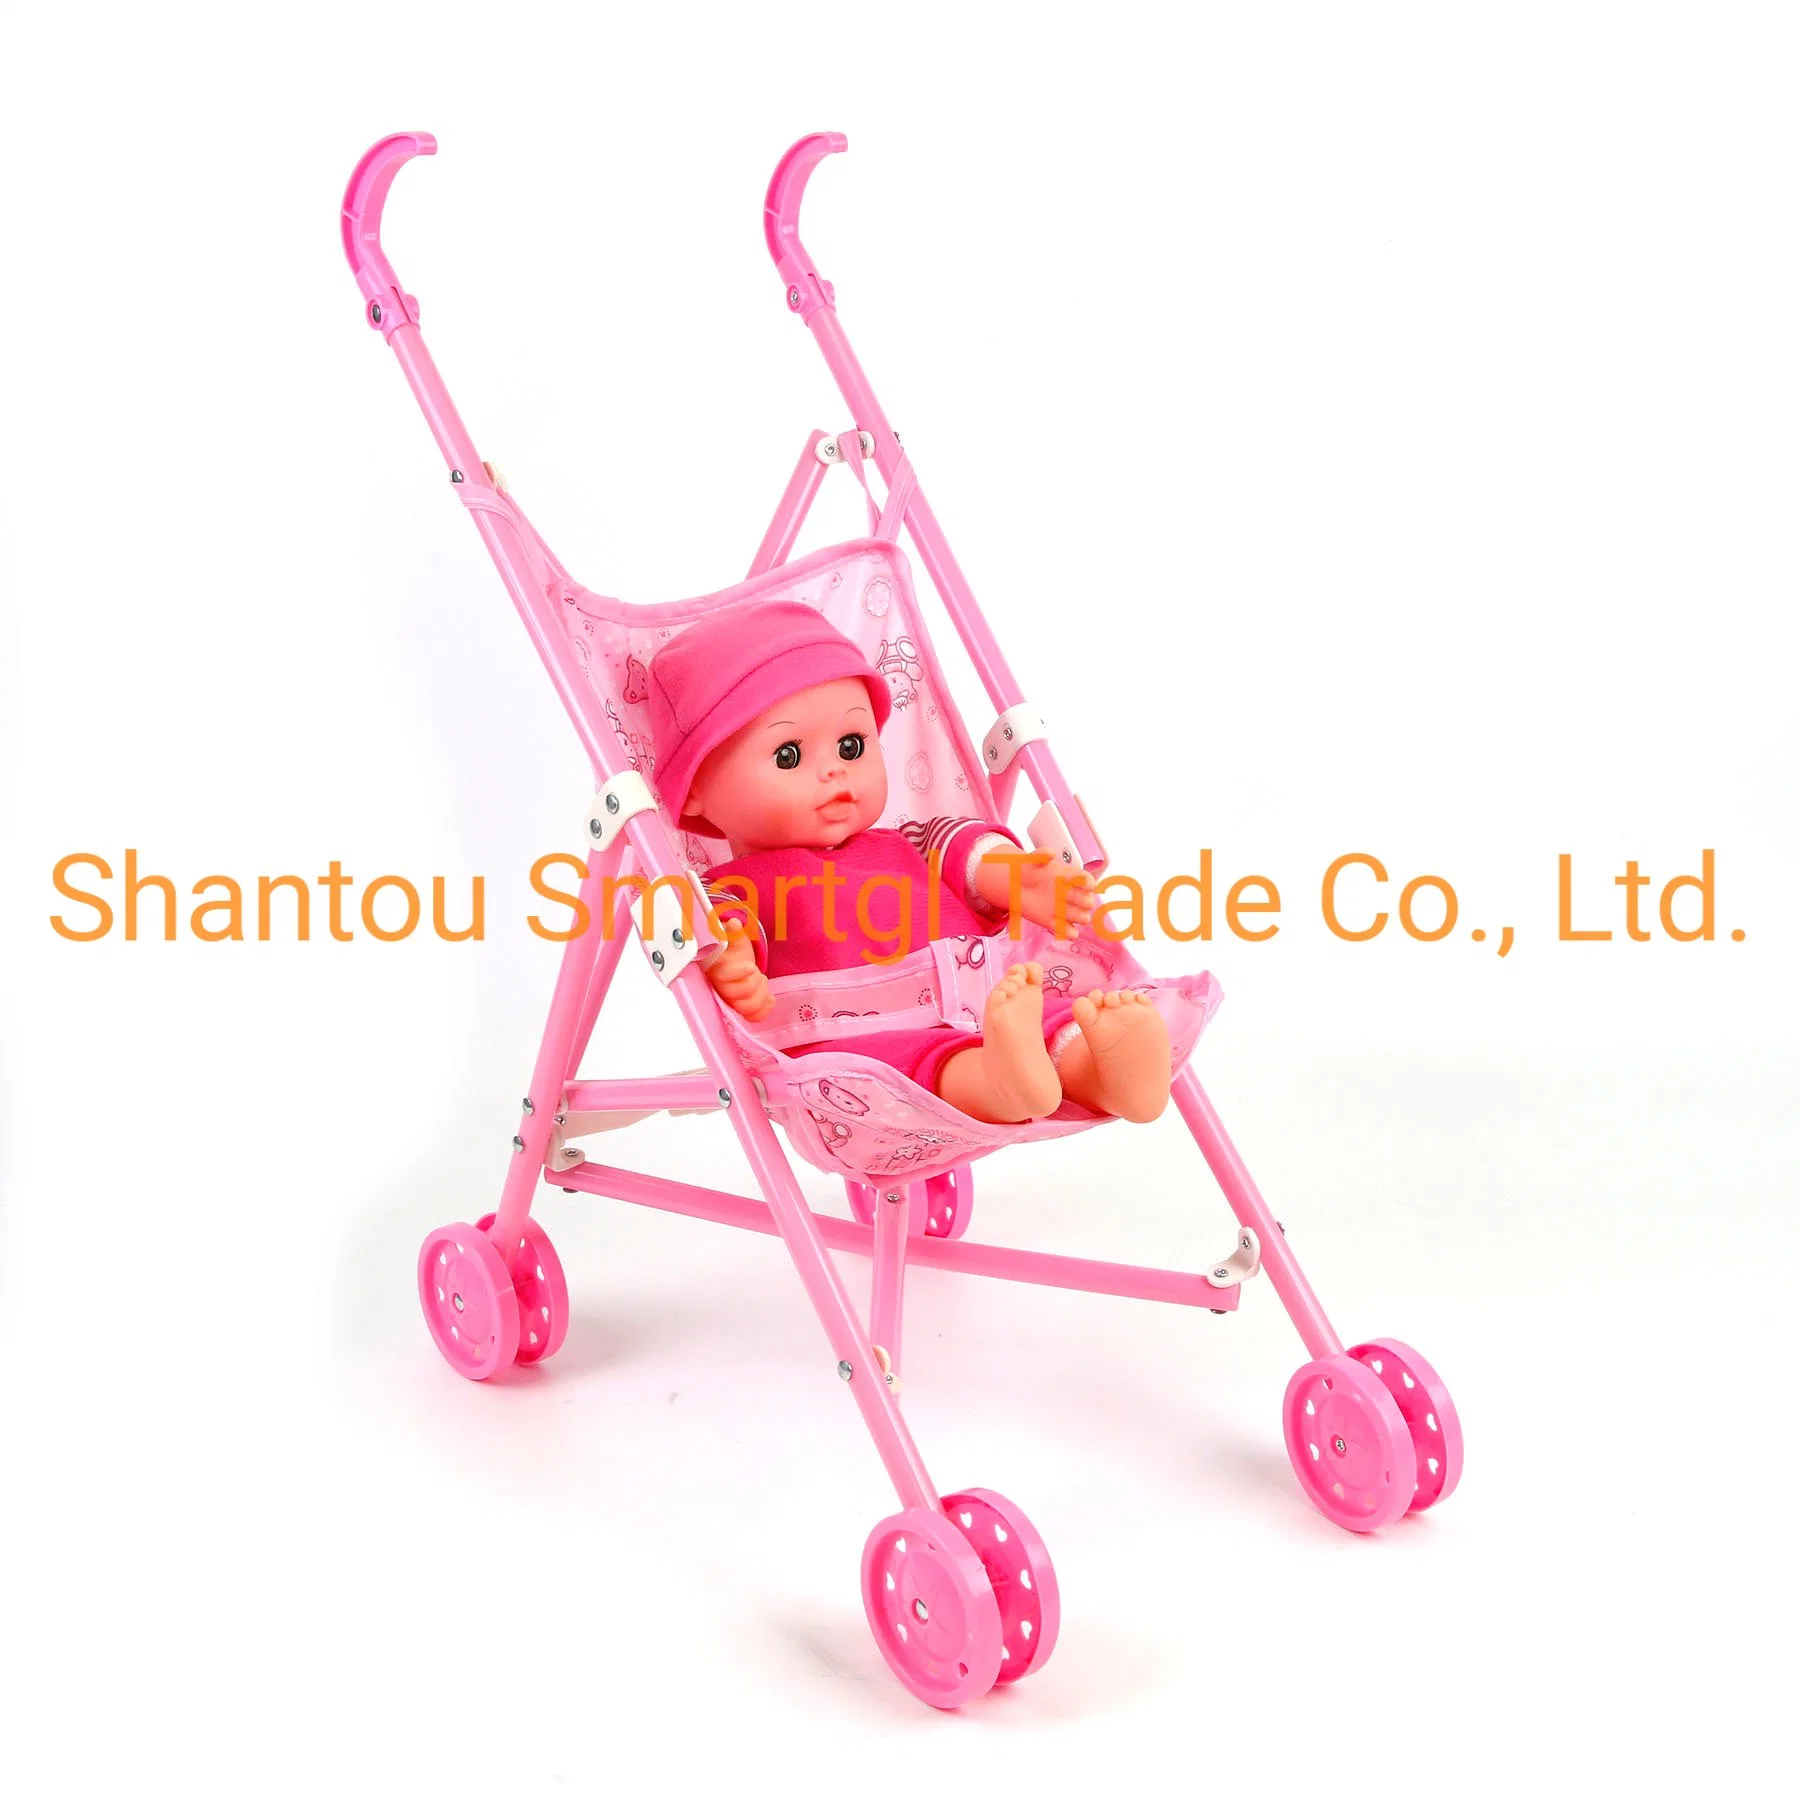 14" Doll Kid Toy with 4 Sounds with Stroller